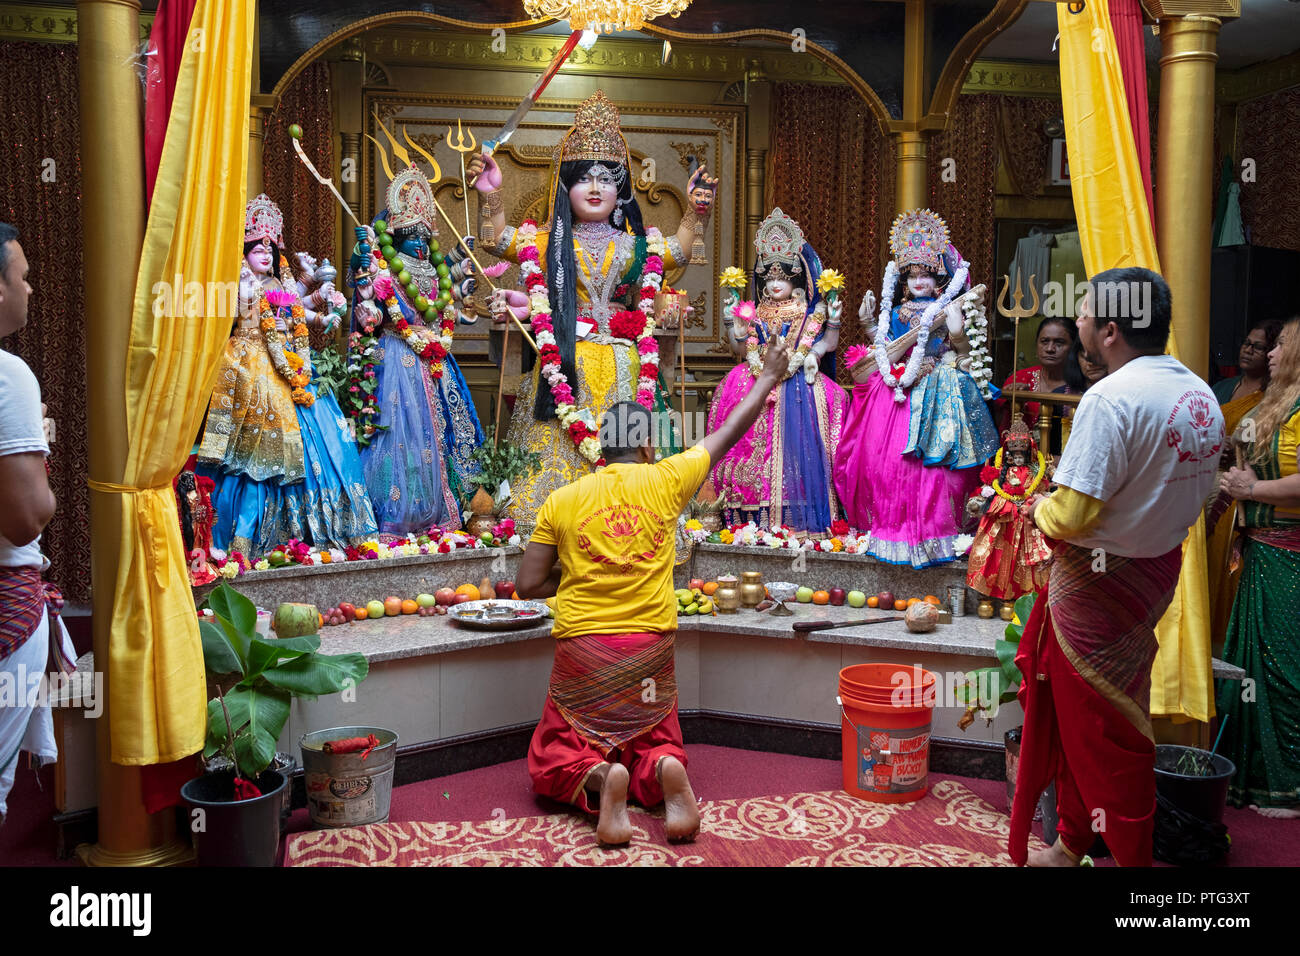 A worshipper making offering to the deities at a Hindu Mandir (temple) in Richmond Hill, Queens, New York. Stock Photo